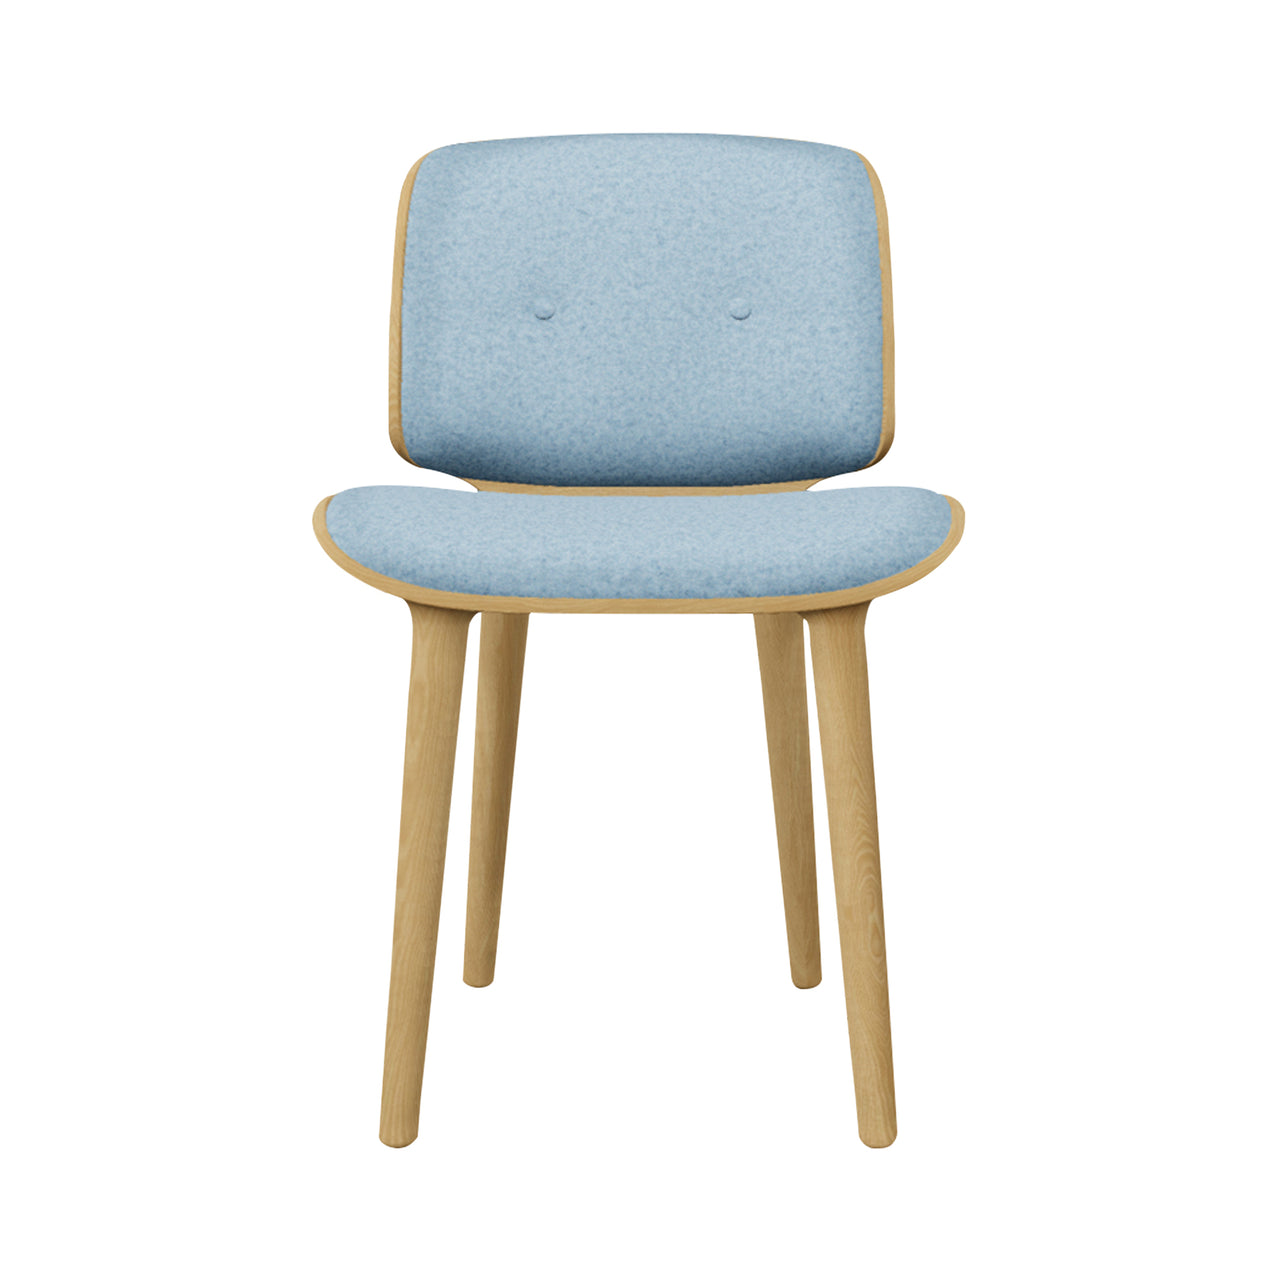 Nut Dining Chair: White Wash